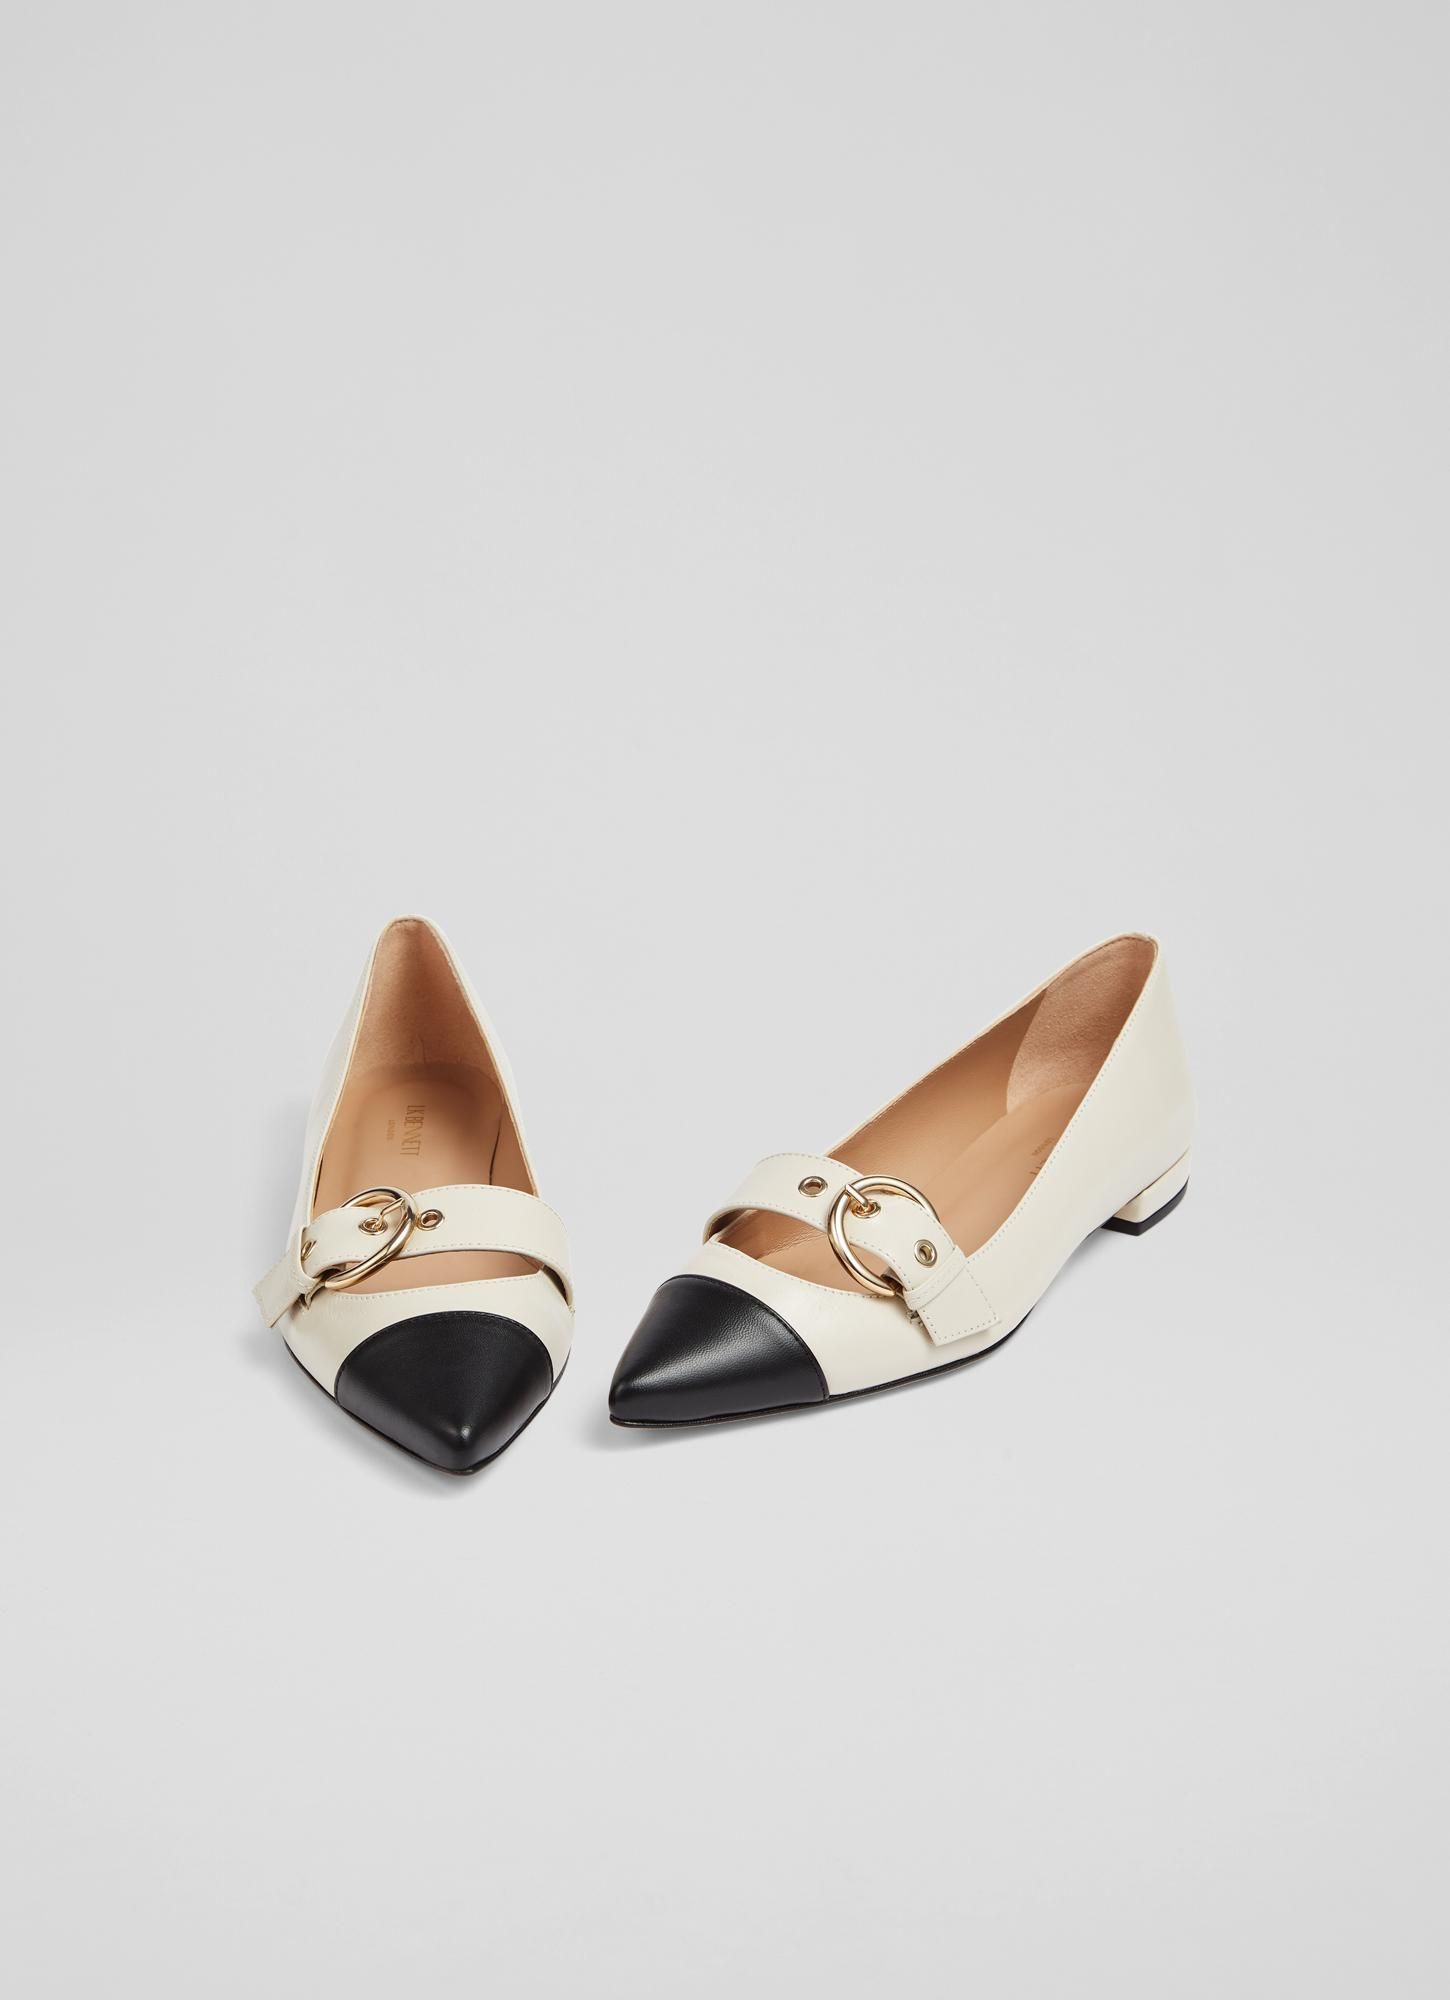 Elevating the classic flat, our Milly pointed pumps are perfect for taking you between the seasons. Crafted in Spain from beautiful cream nappa leather, they have a pointed toe with black leather toe cap detail, gold statement buckles and  flat heels. Effortless and elegant, wear them with dresses or tailored trousers as a smarter alternative to trainers.